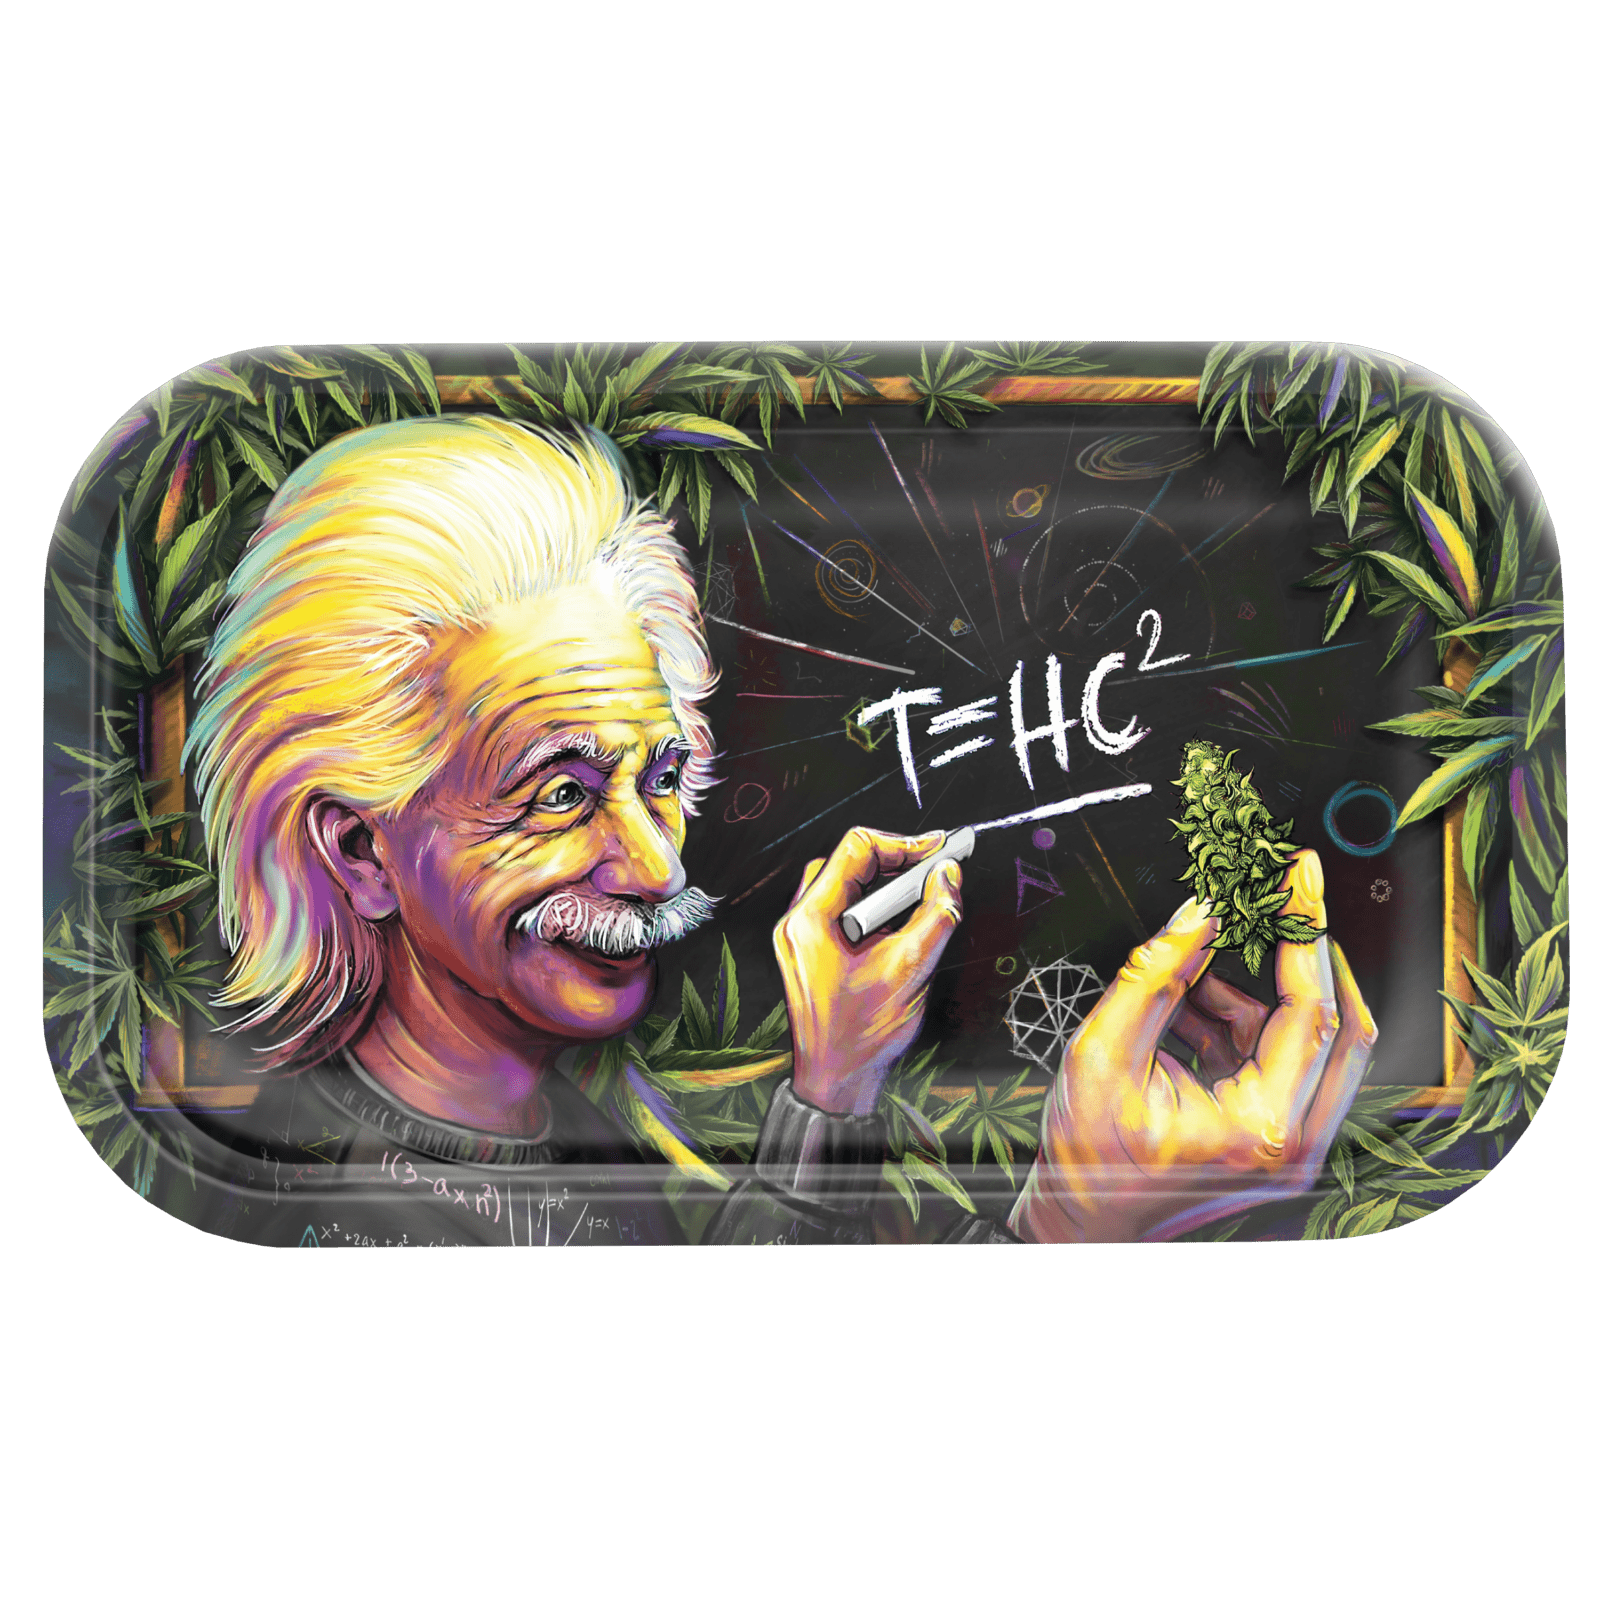 t=hc2 einstein rectangle rolling tray image